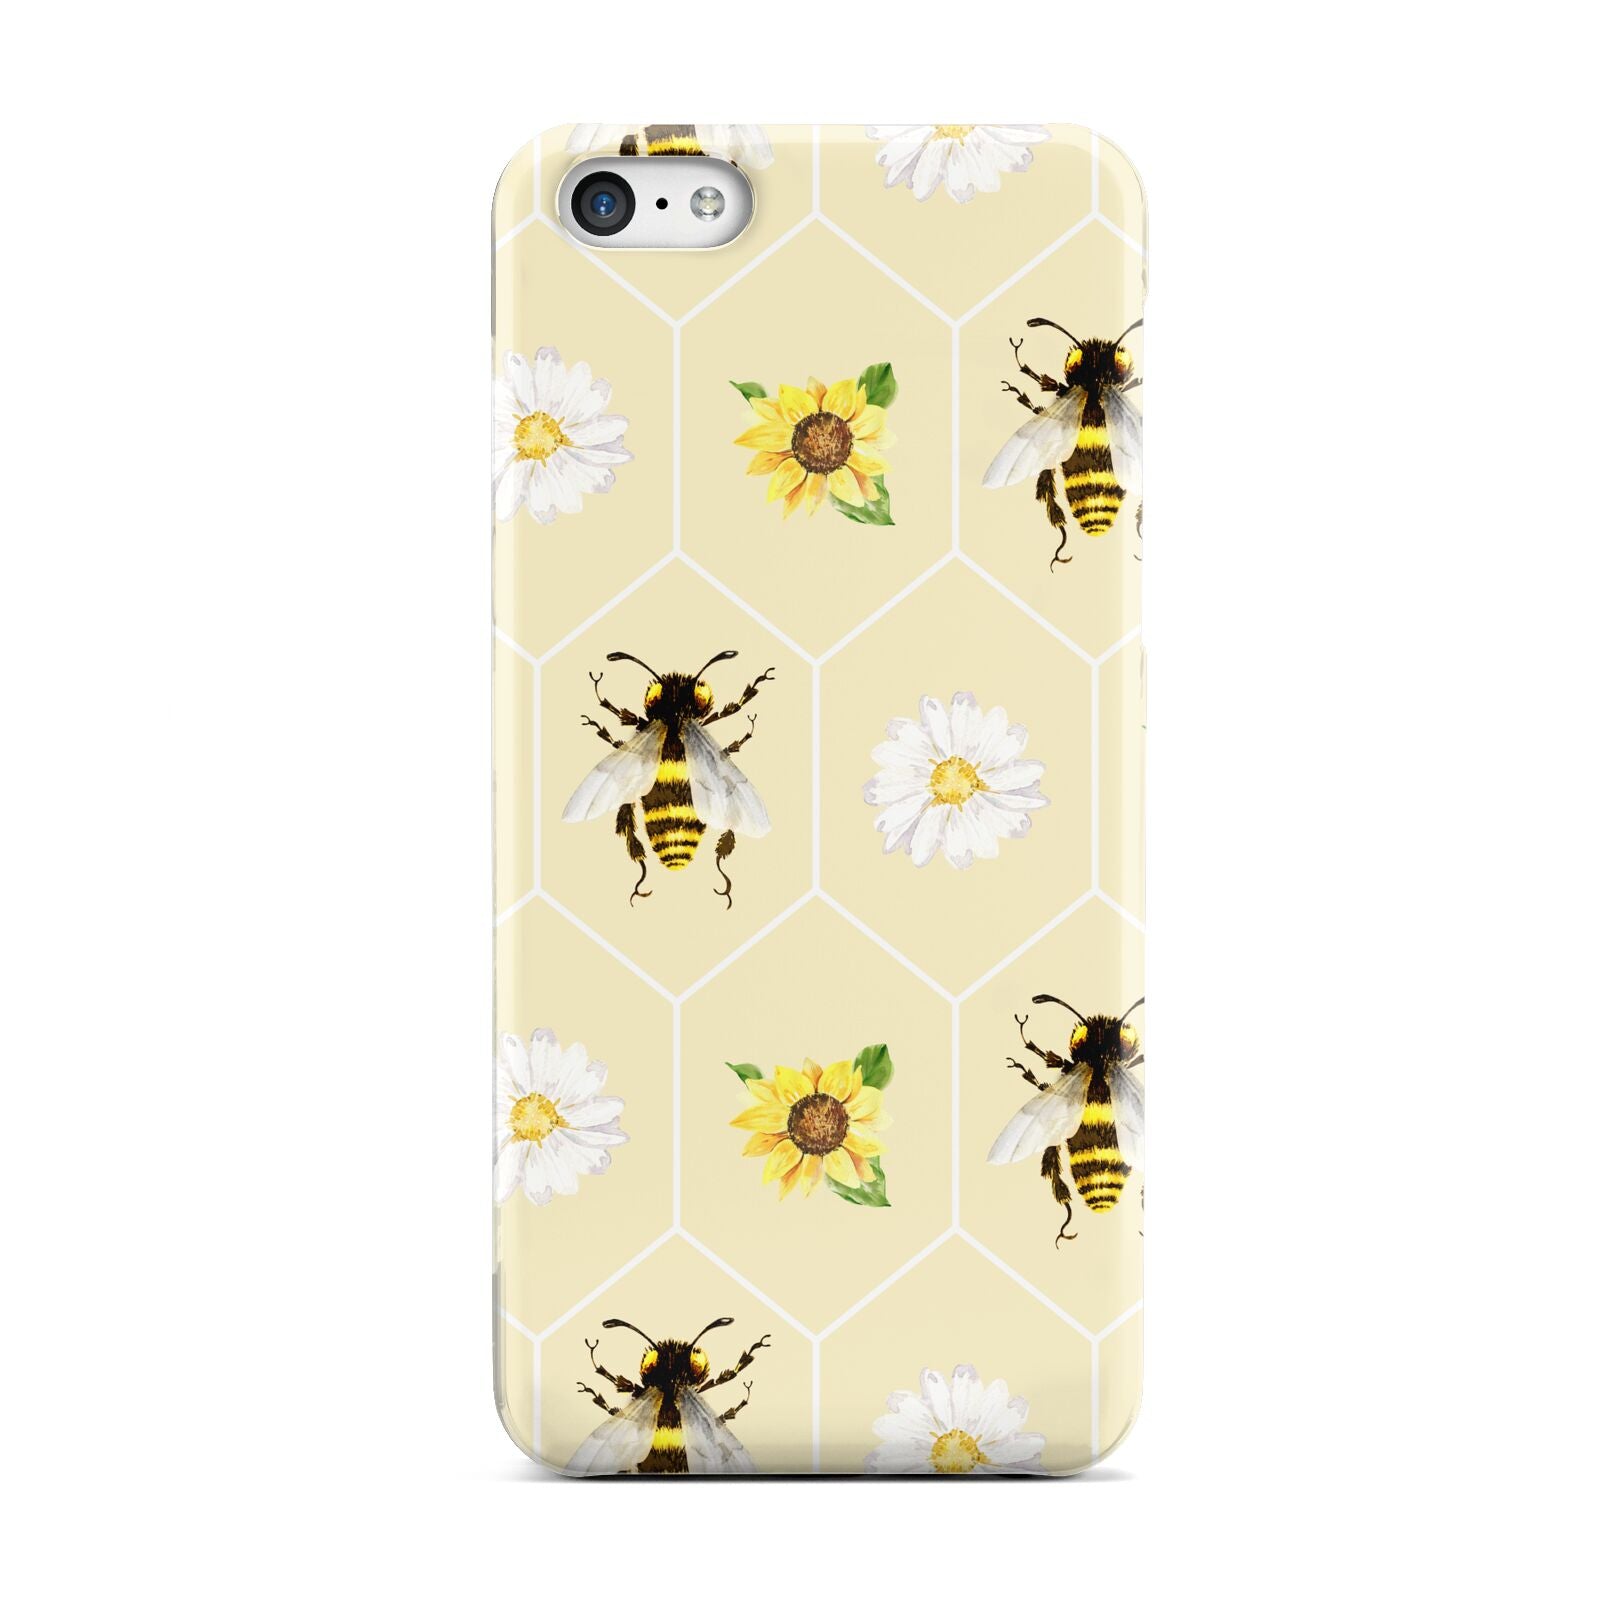 Daisies Bees and Sunflowers Apple iPhone 5c Case